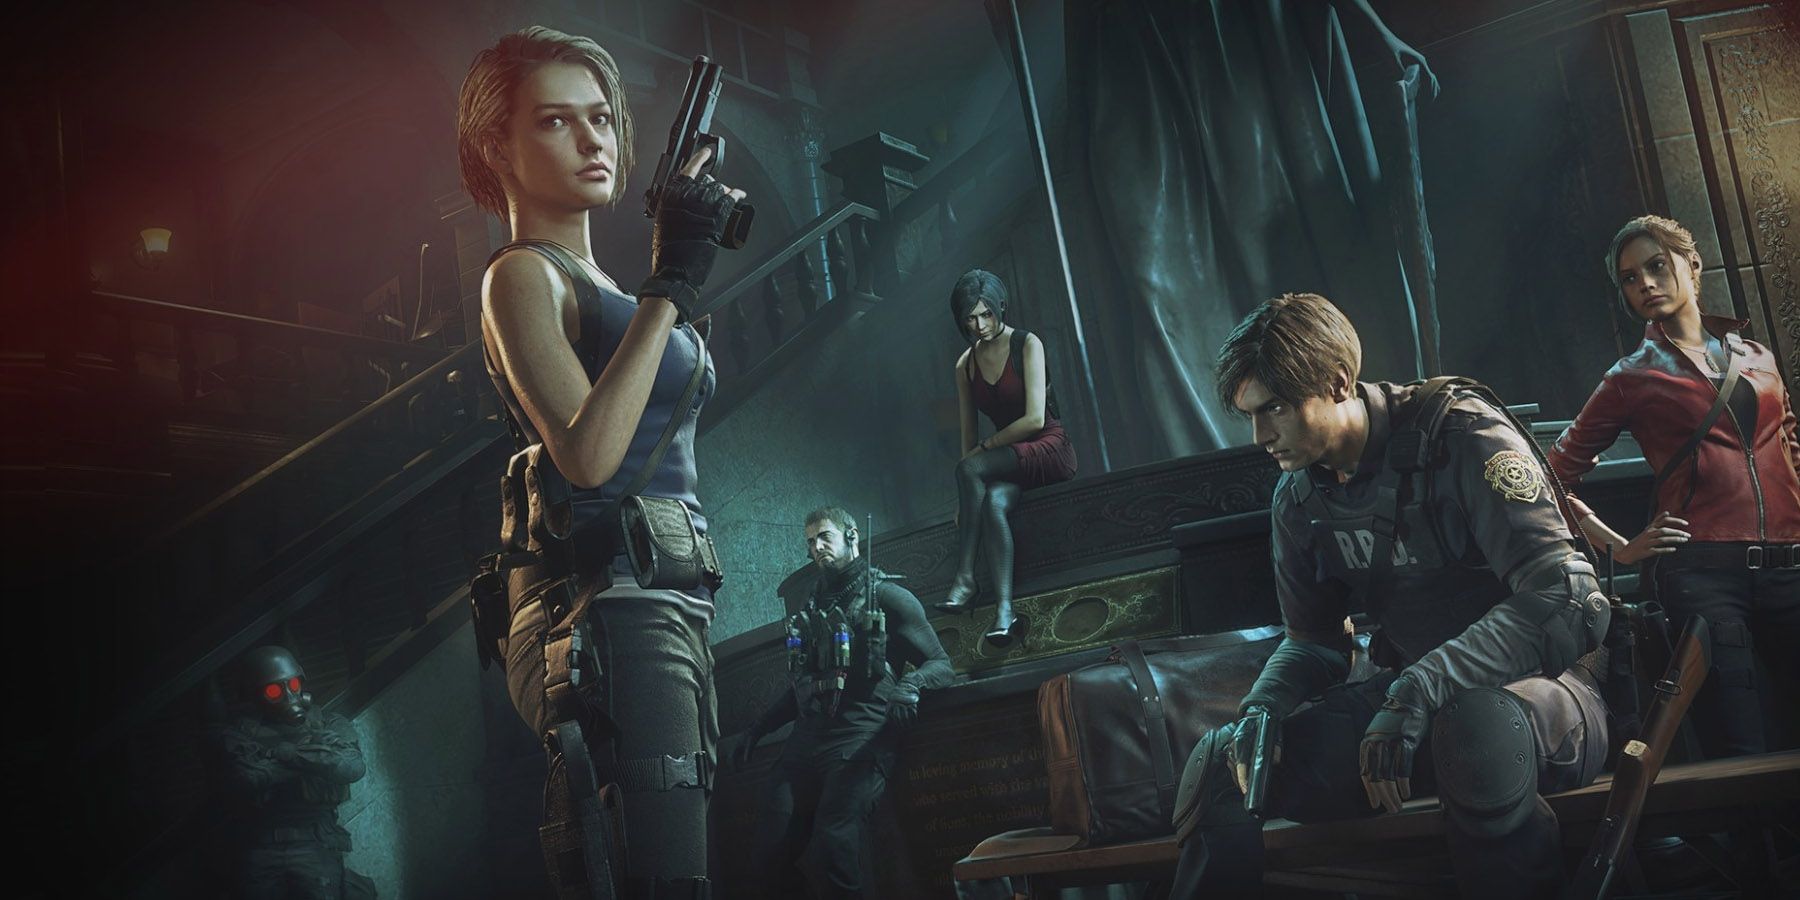 Resident Evil Re:Verse Review 